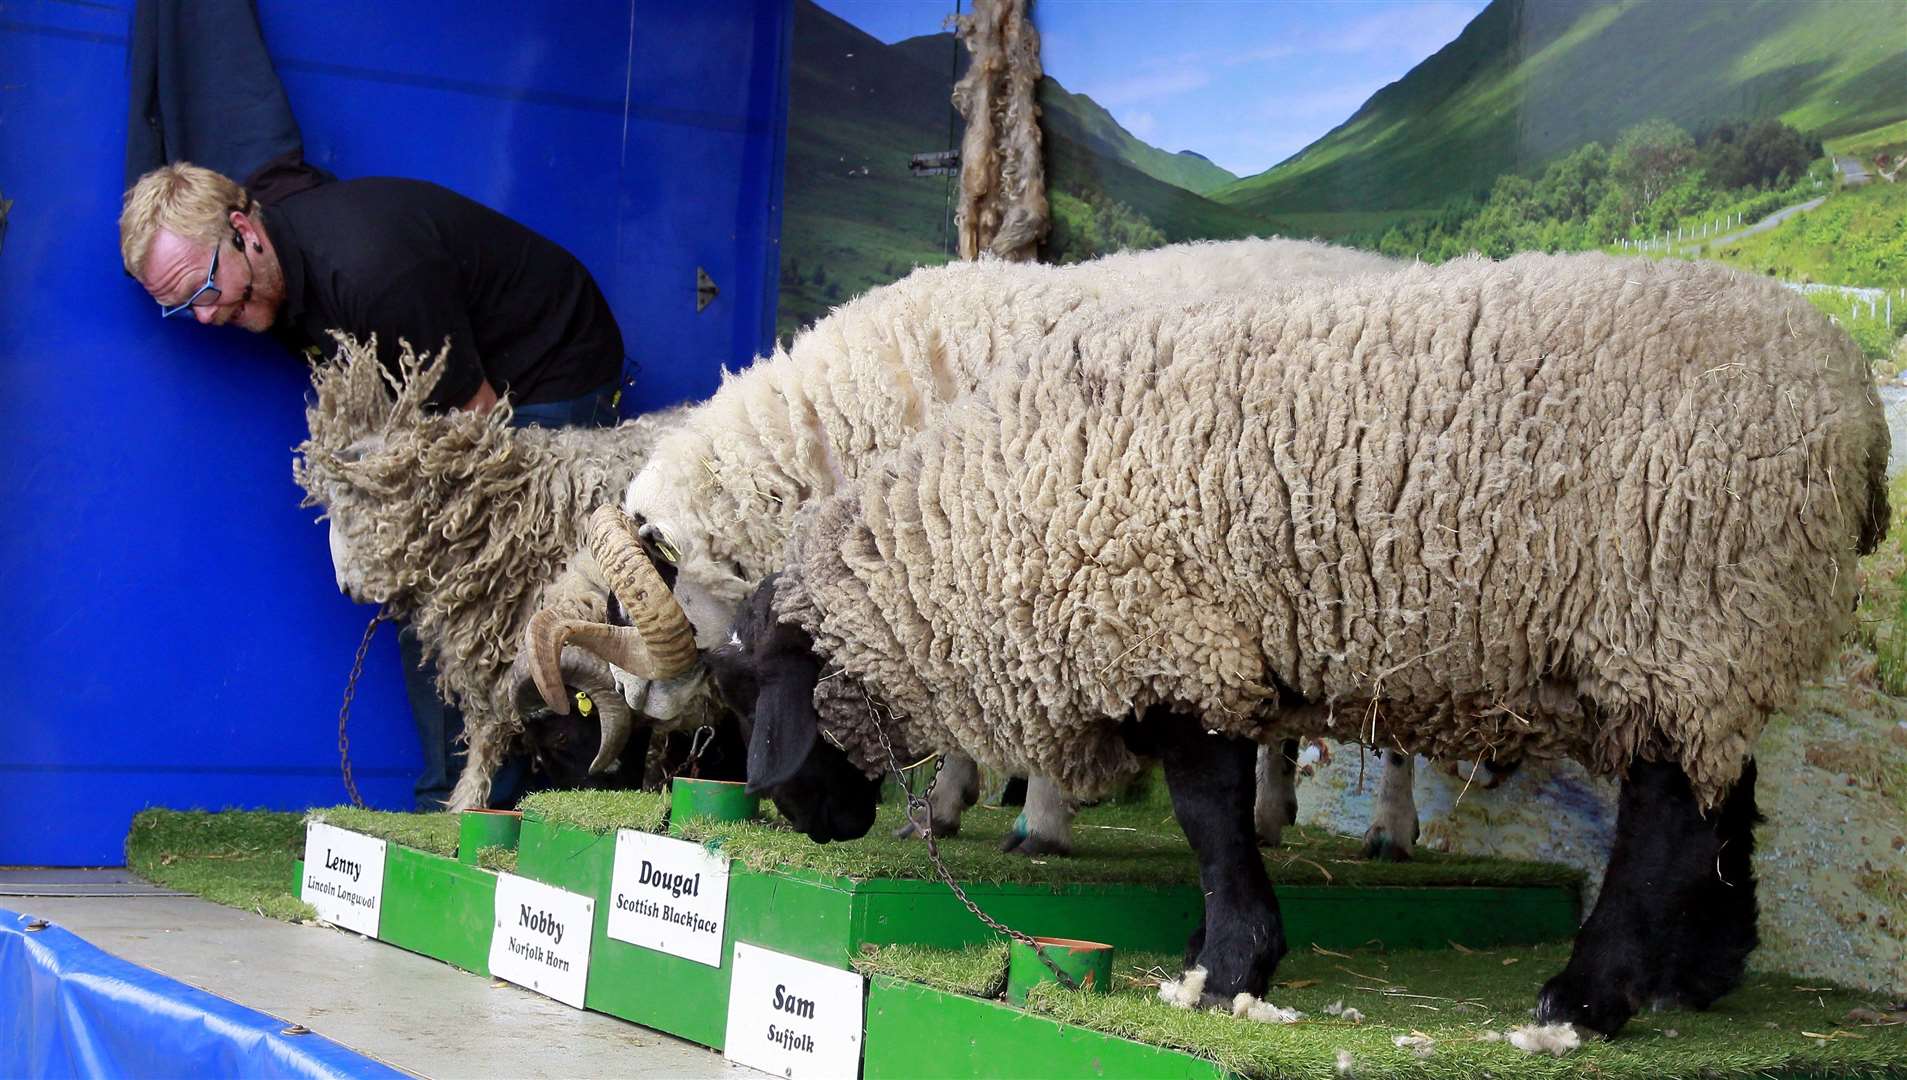 The Sheep Show in action